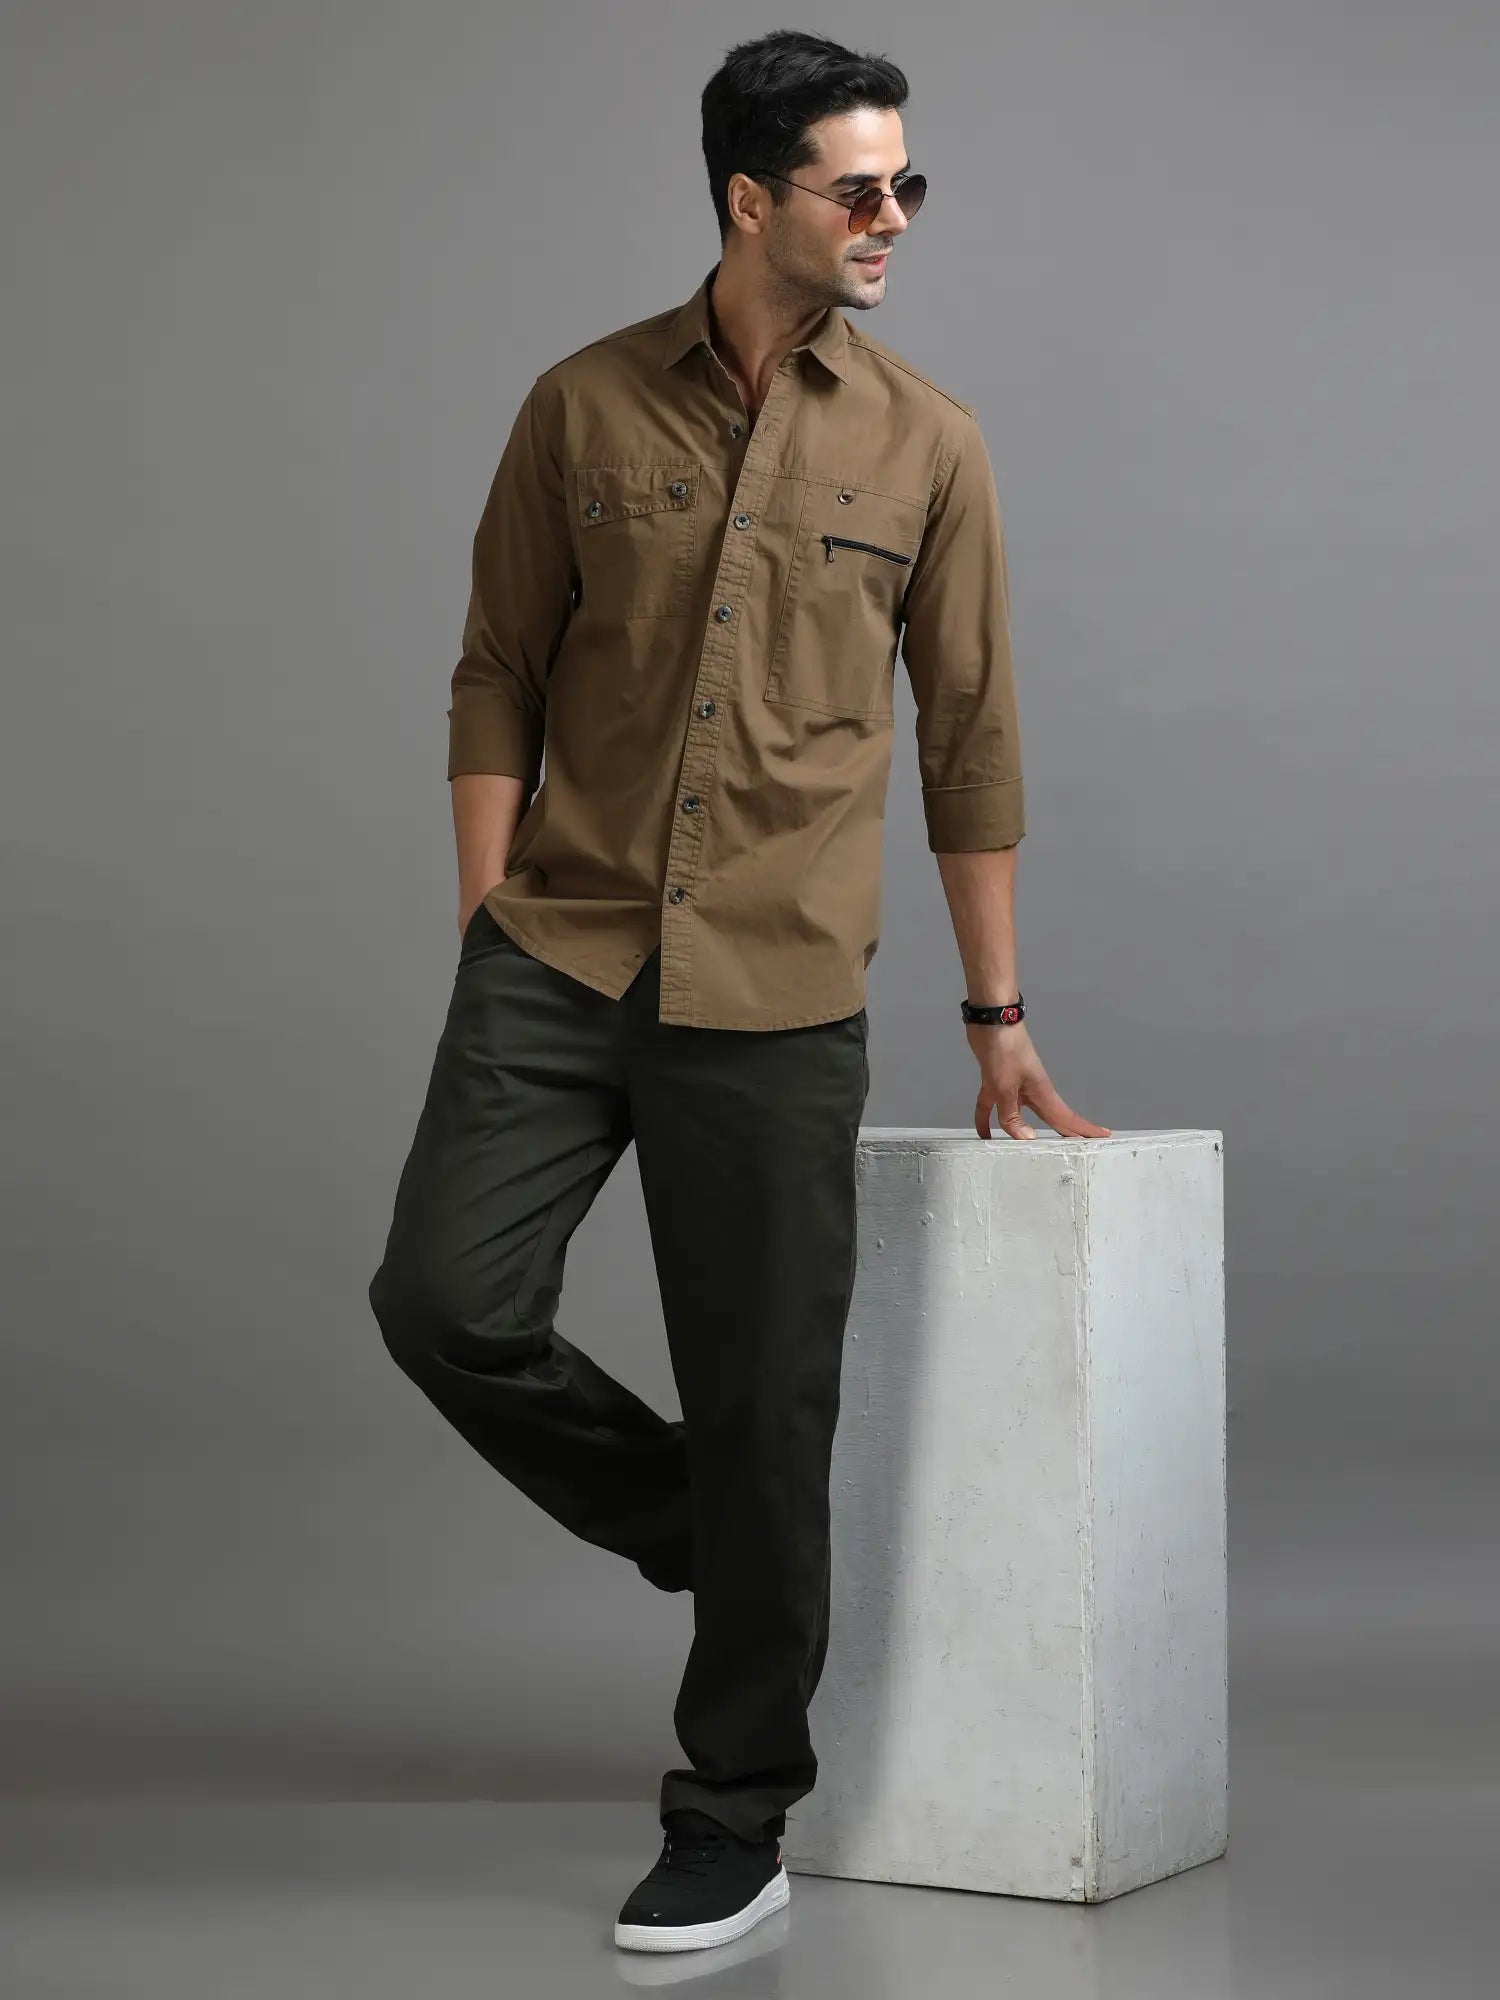 Warm and Rich Cocoa Solid Shirt for Men